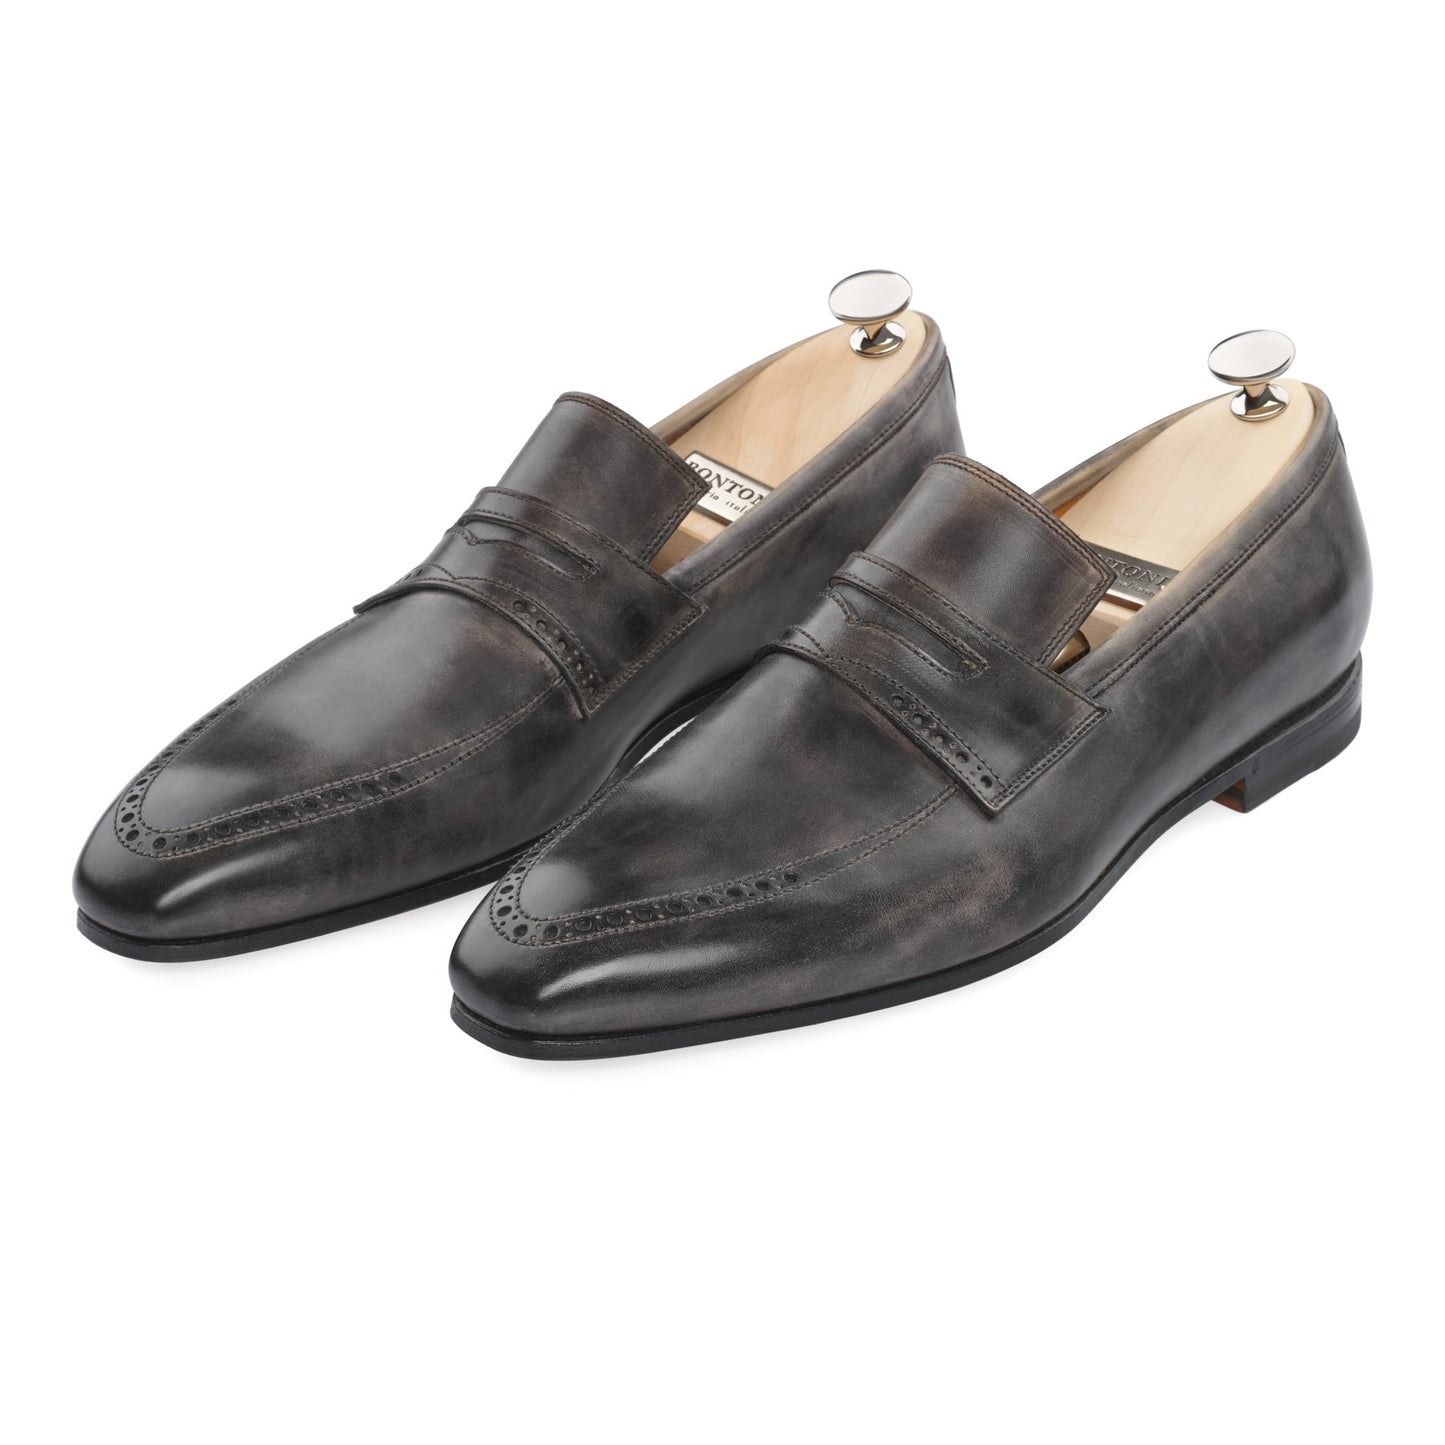 Bontoni "Tancredi" Classic Loafer with Perforated Details - SARTALE